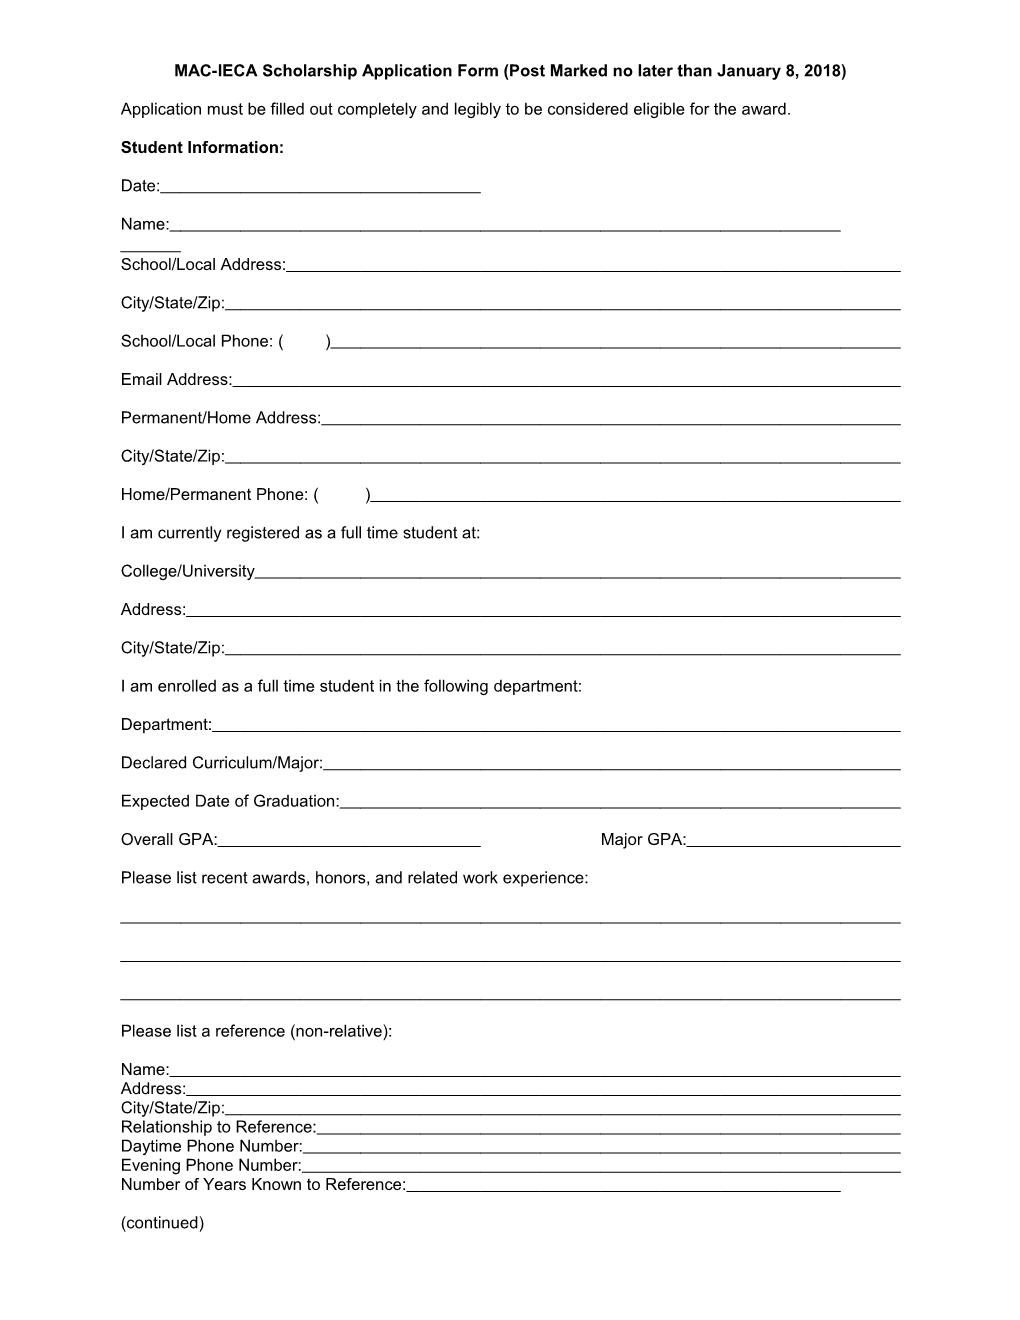 Application Must Be Filled out Completely and Legibly to Be Considered Eligible for the Award